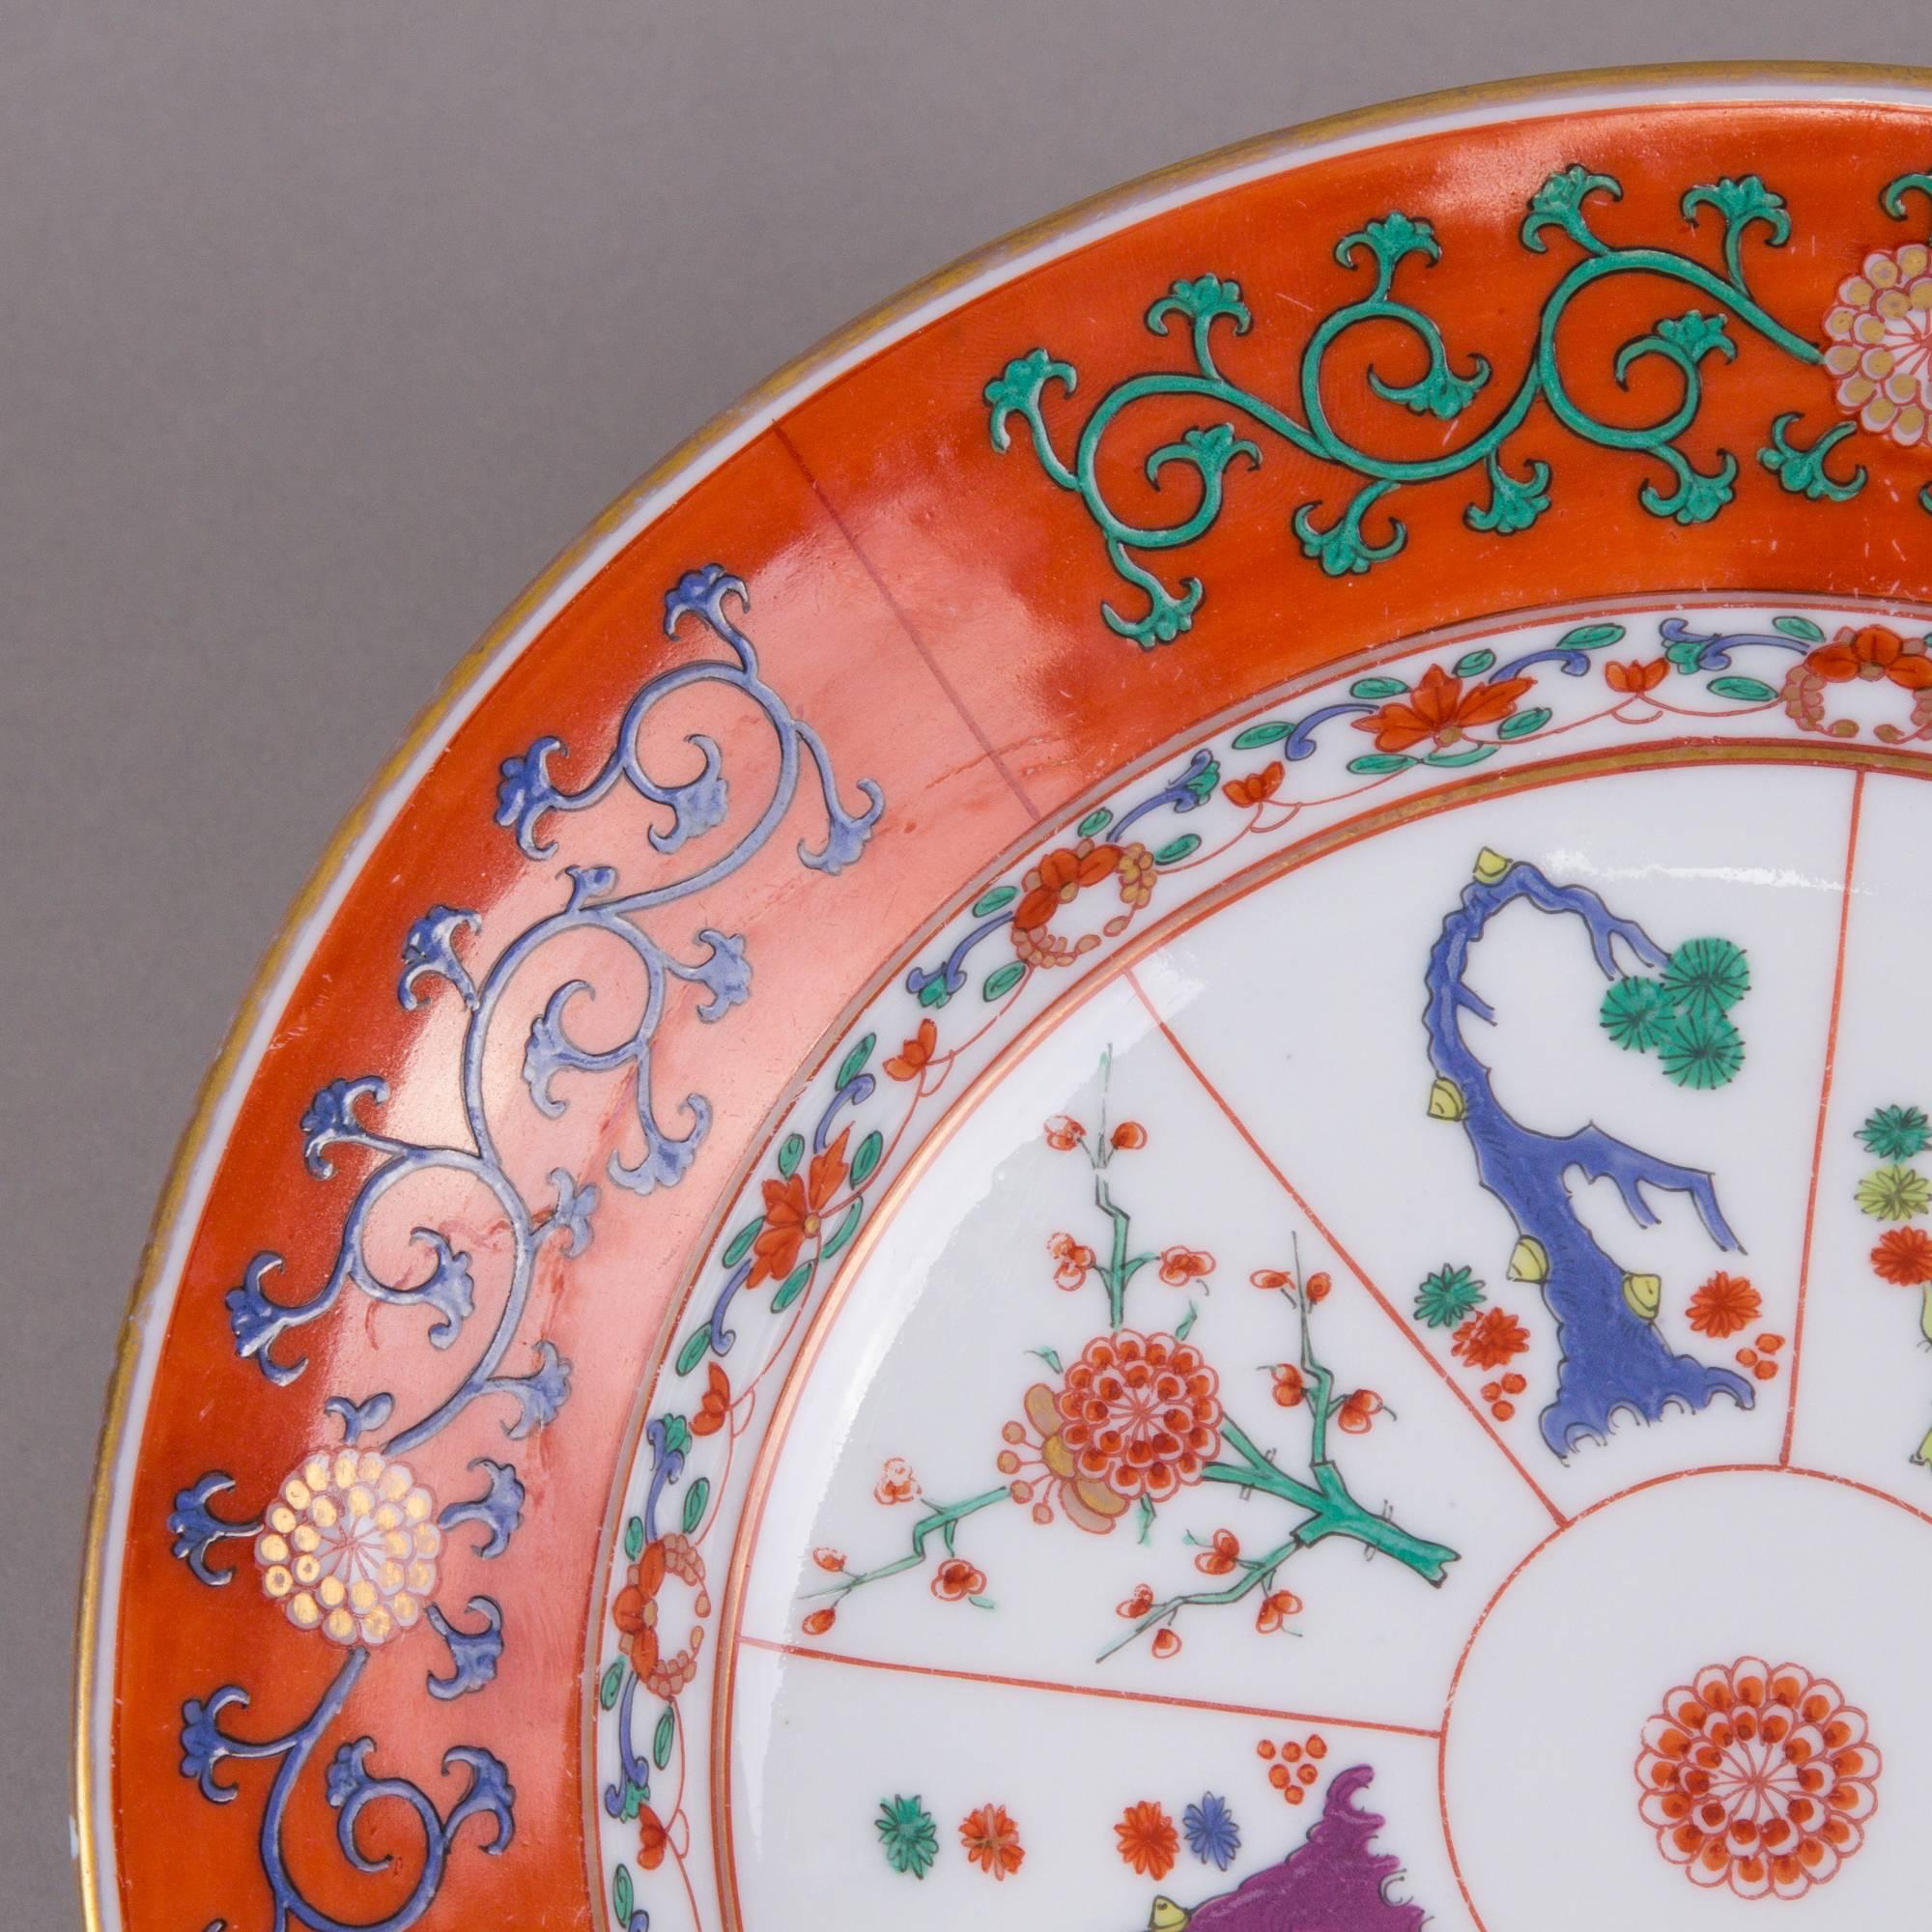 This is a really rare Herend piece, because this plate is almost 120 years old. One of the first pieces painted with this beautiful and famous pattern. It's in very good condition for it's age, only light wear visible, and there's a small hairline